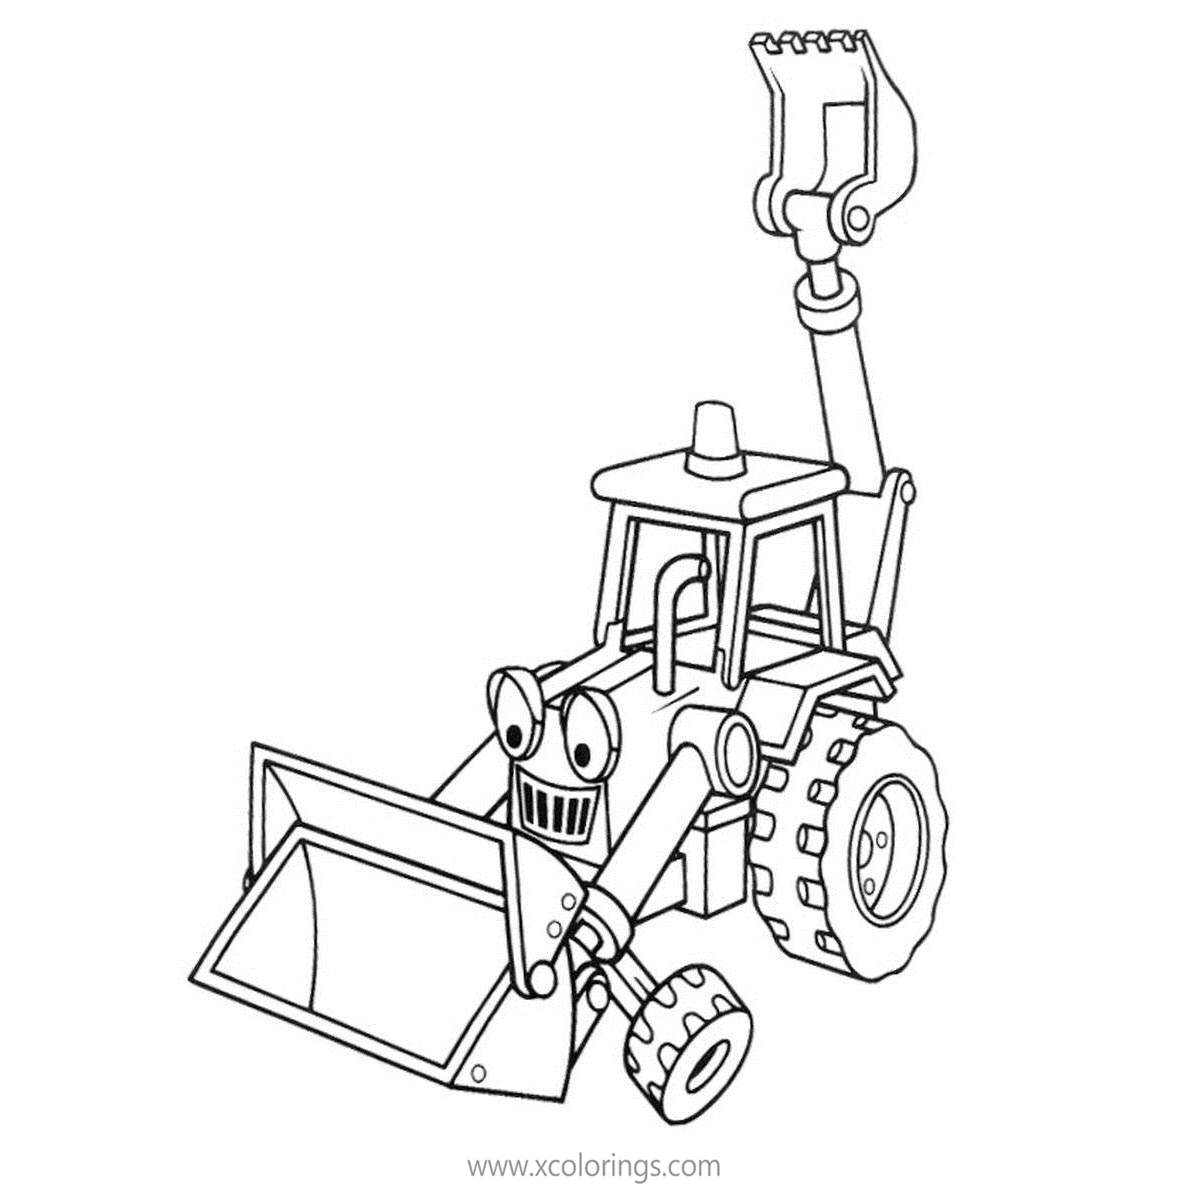 Free Bob the Builder Coloring Pages Machine Scoop printable